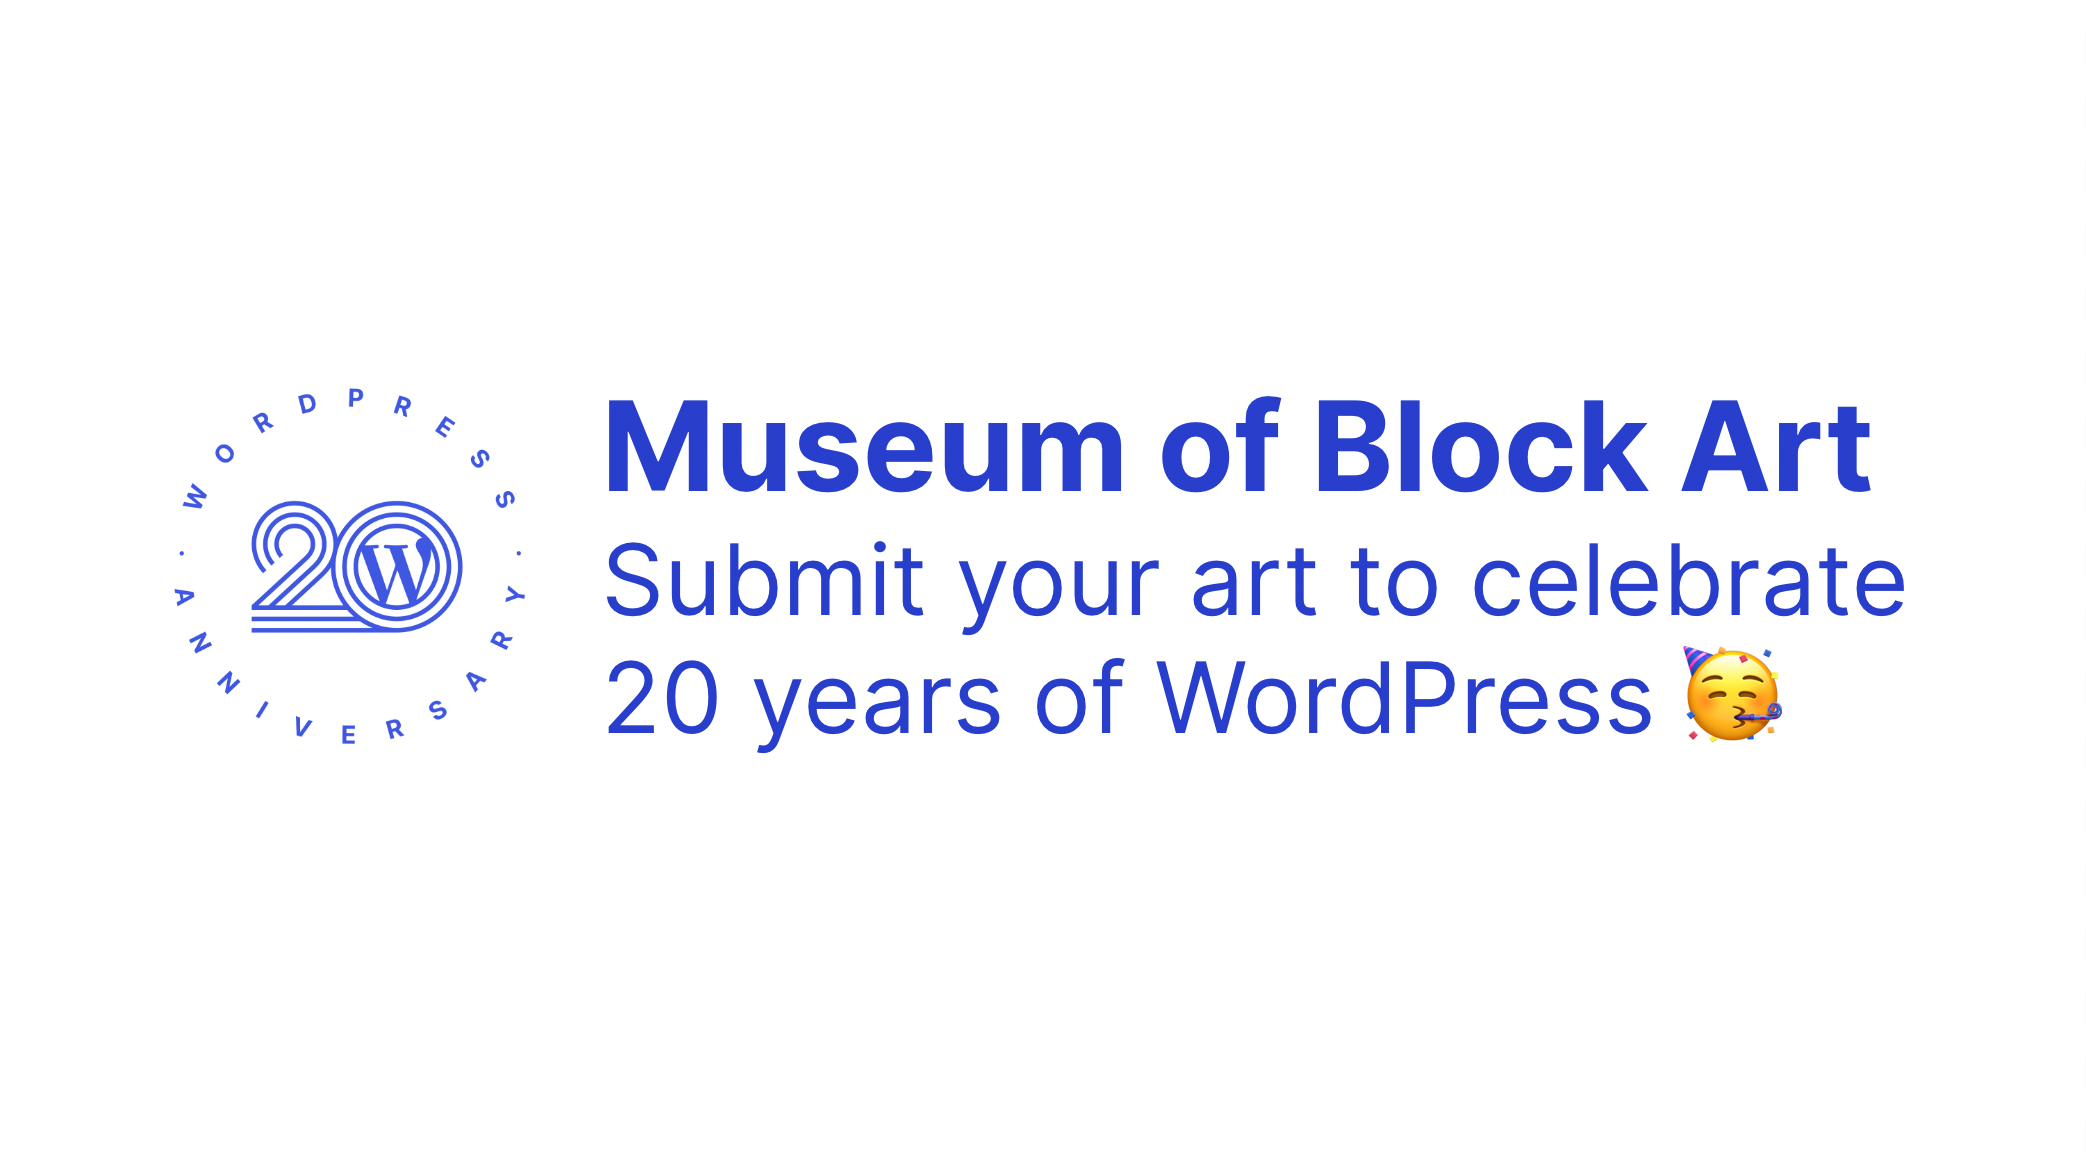 Blue text on a white background announcing the Museum of Block art is open for submissions for art to celebrate 20 years of WordPress with the 20 anniversary logo to the left of the text.